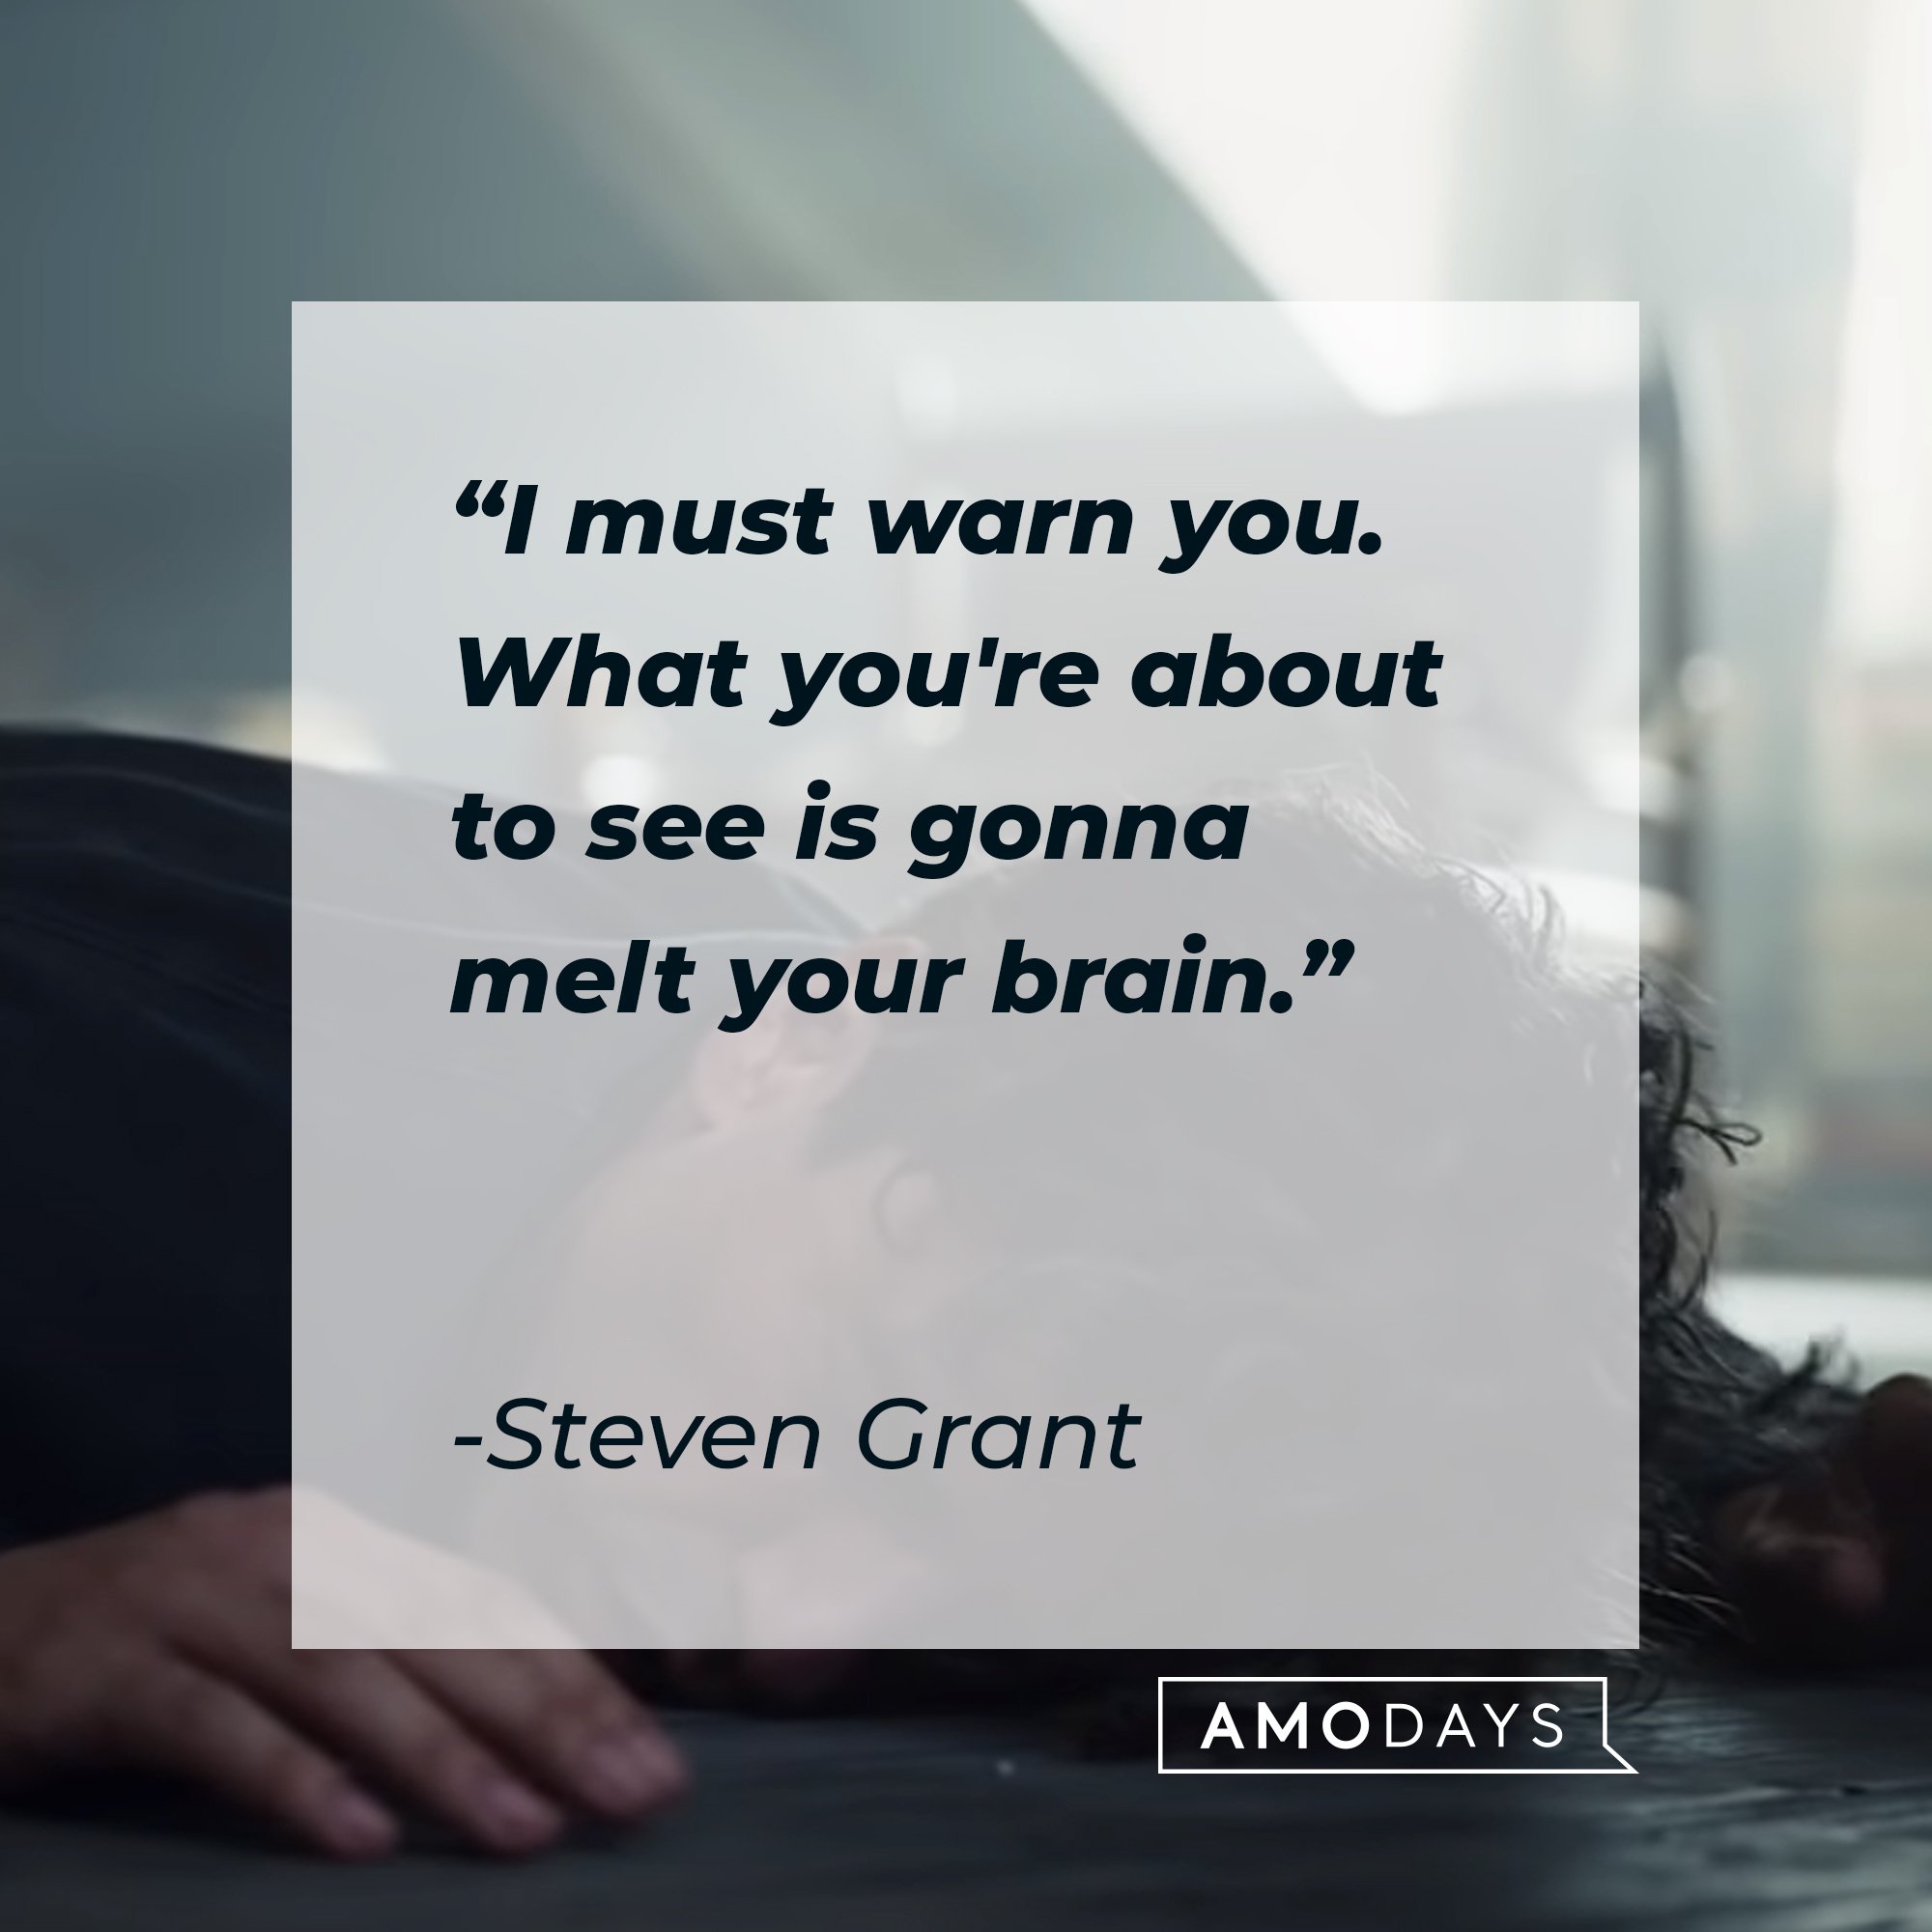  Steven Grant’s quote: "I must warn you. What you're about to see is gonna melt your brain."  | Image: AmoDays